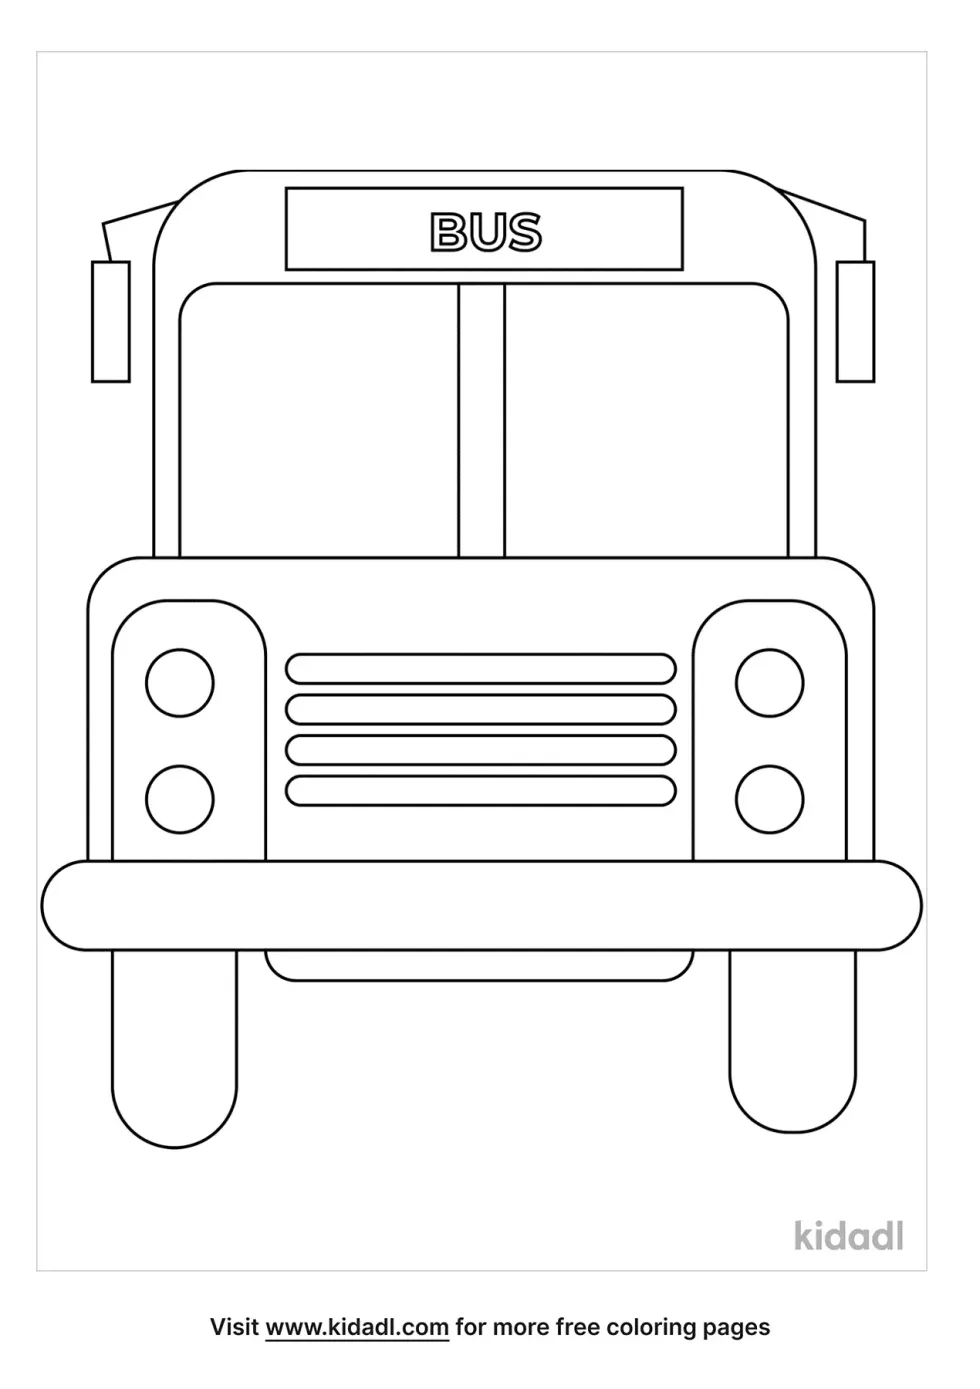 Bus Front View Coloring Page